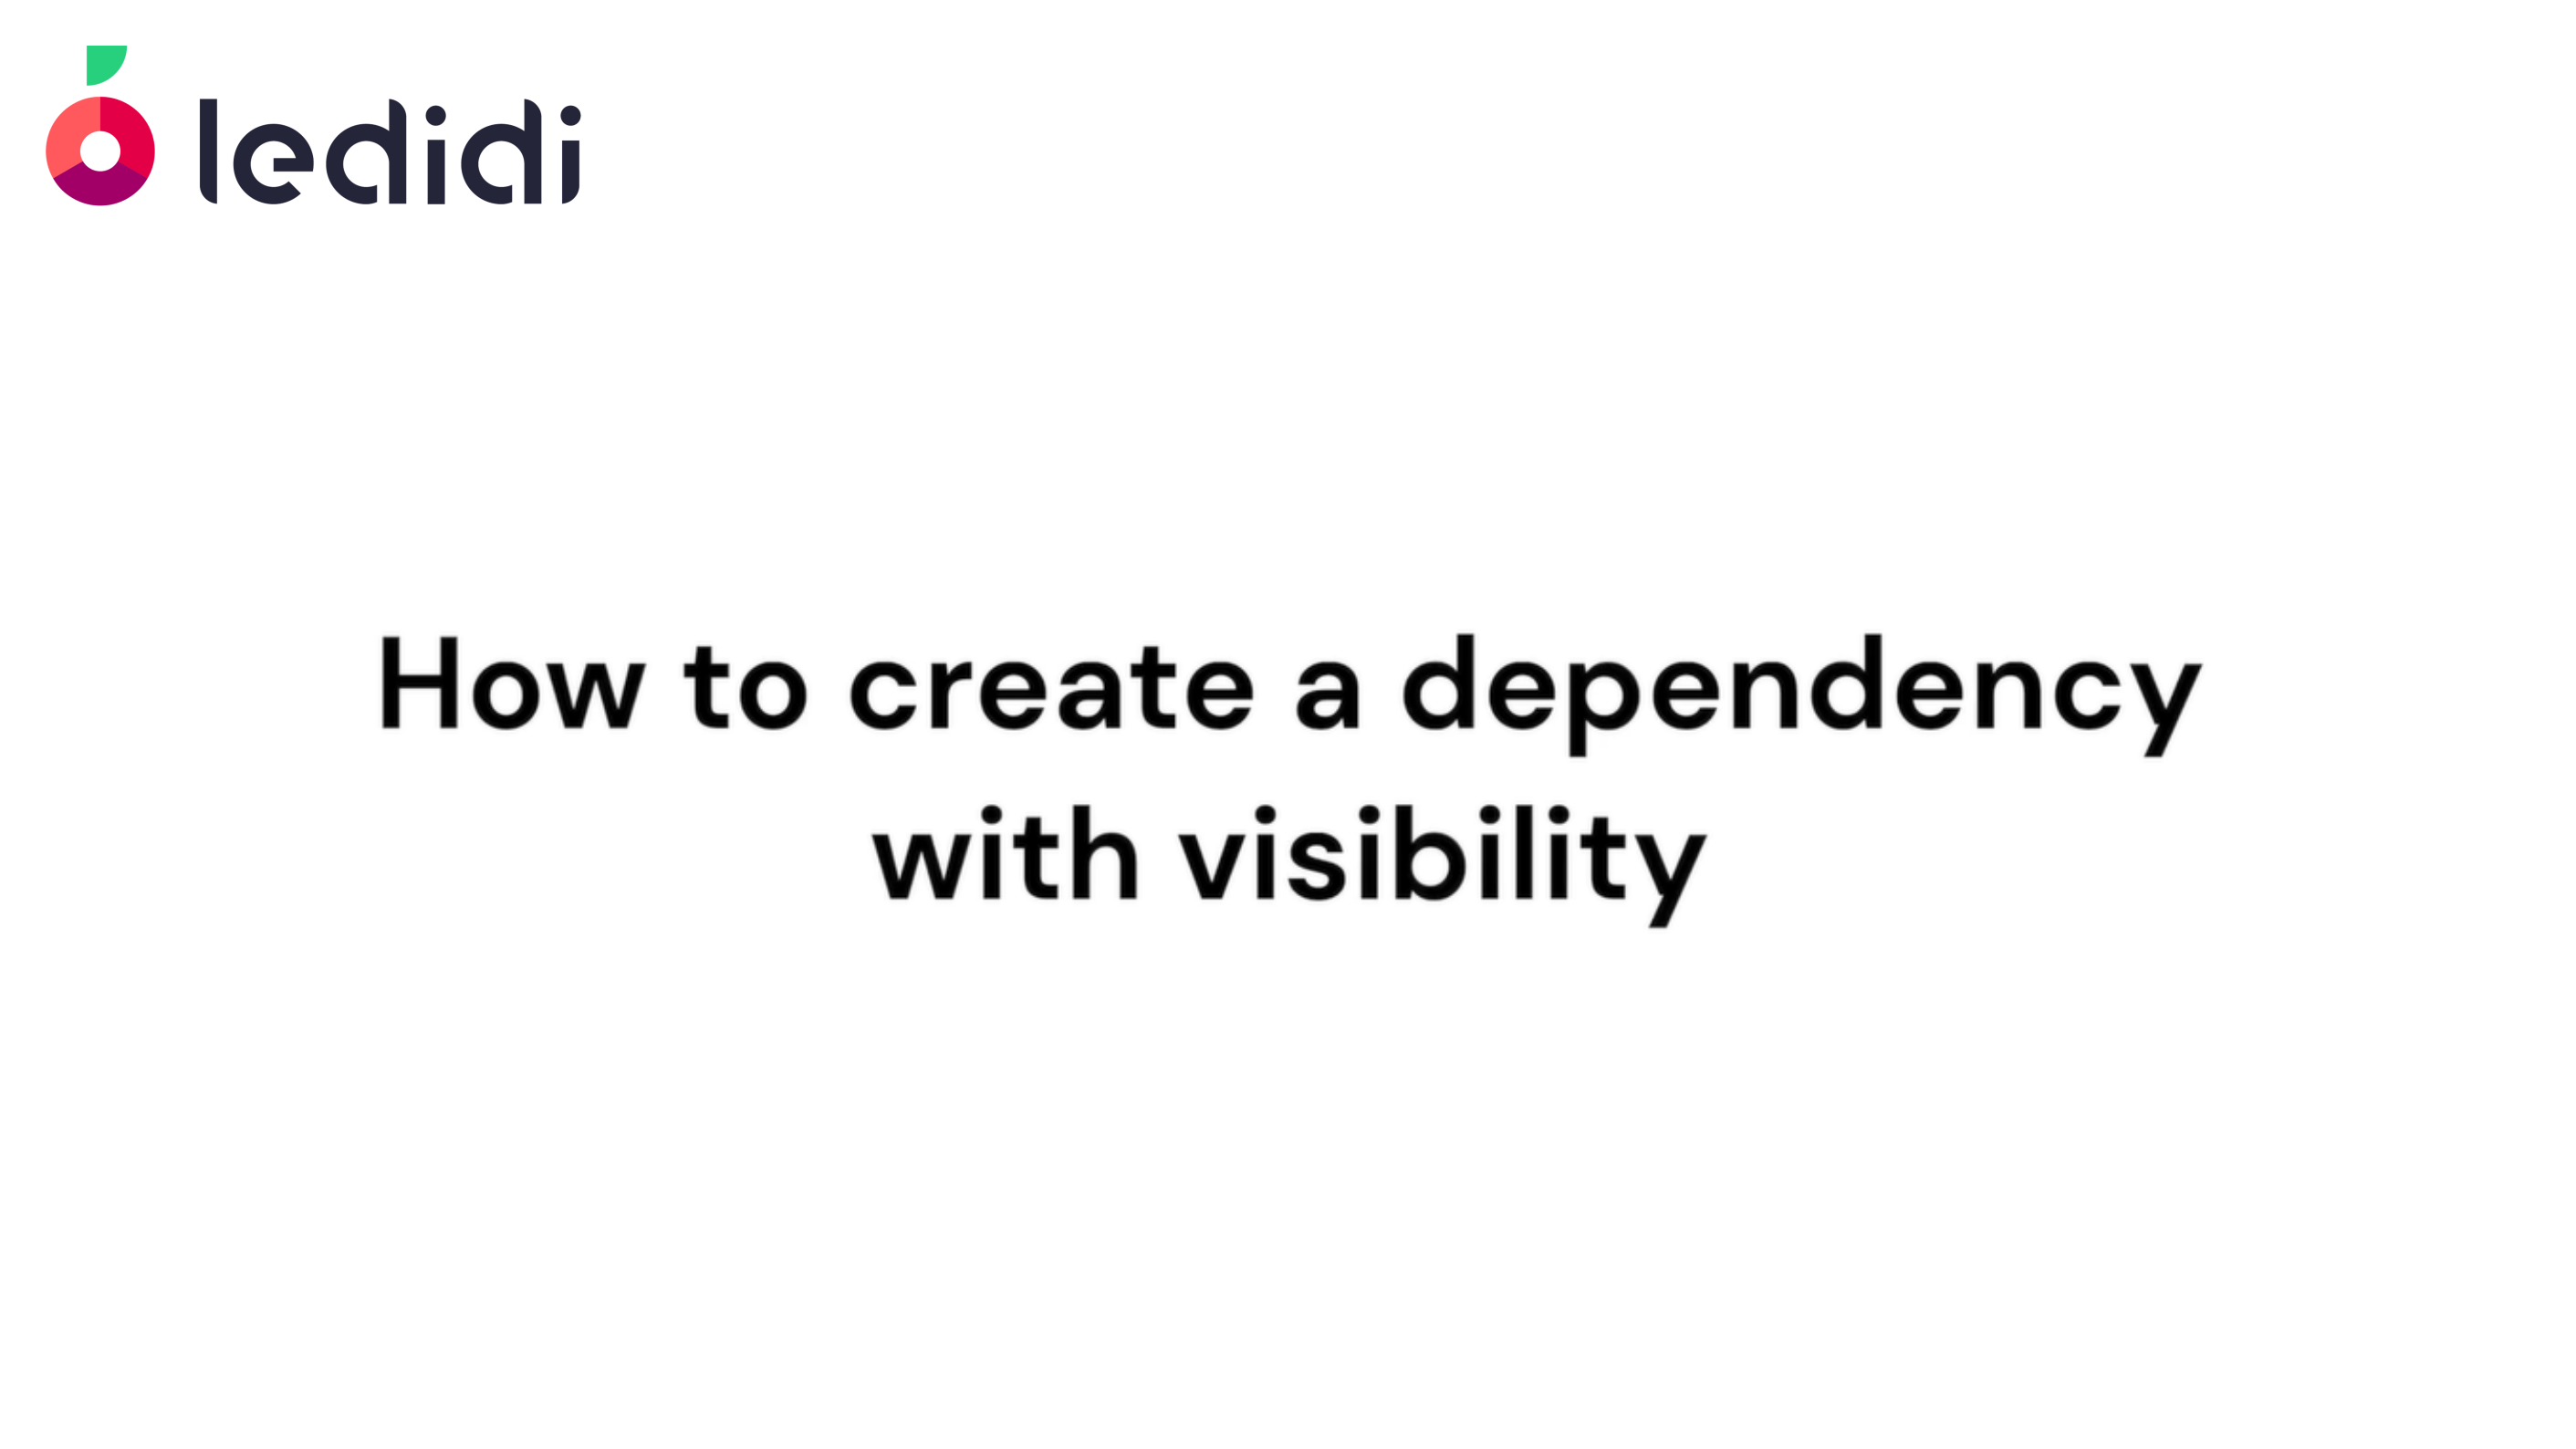 How to create a dependency with visibility